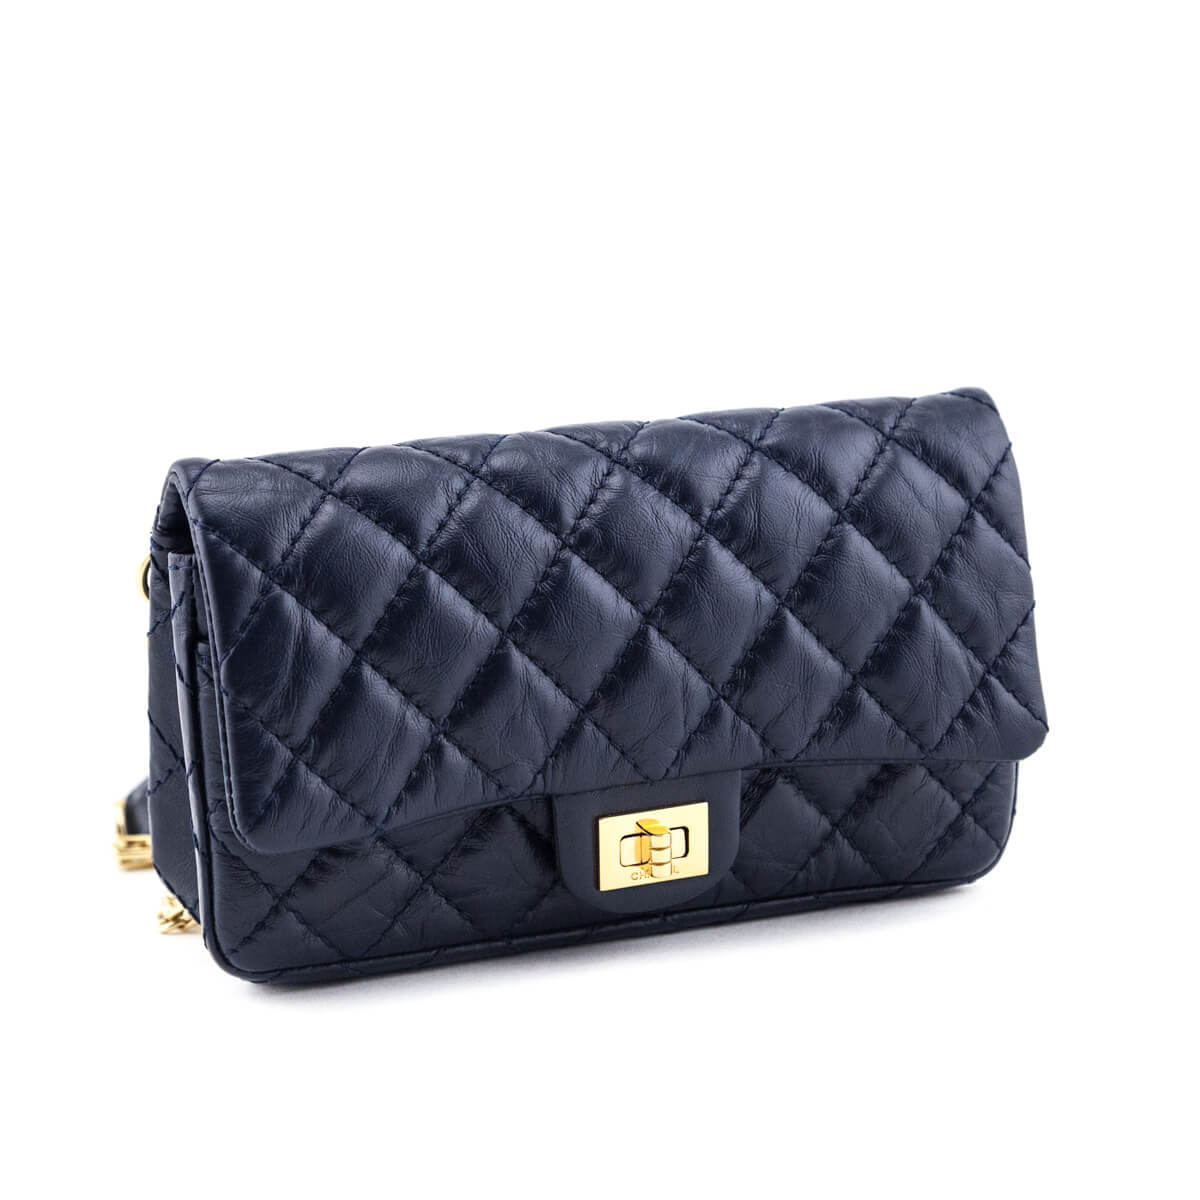 Chanel Marine Quilted Aged Calfskin Reissue Belt Bag - Love that Bag etc - Preowned Authentic Designer Handbags & Preloved Fashions